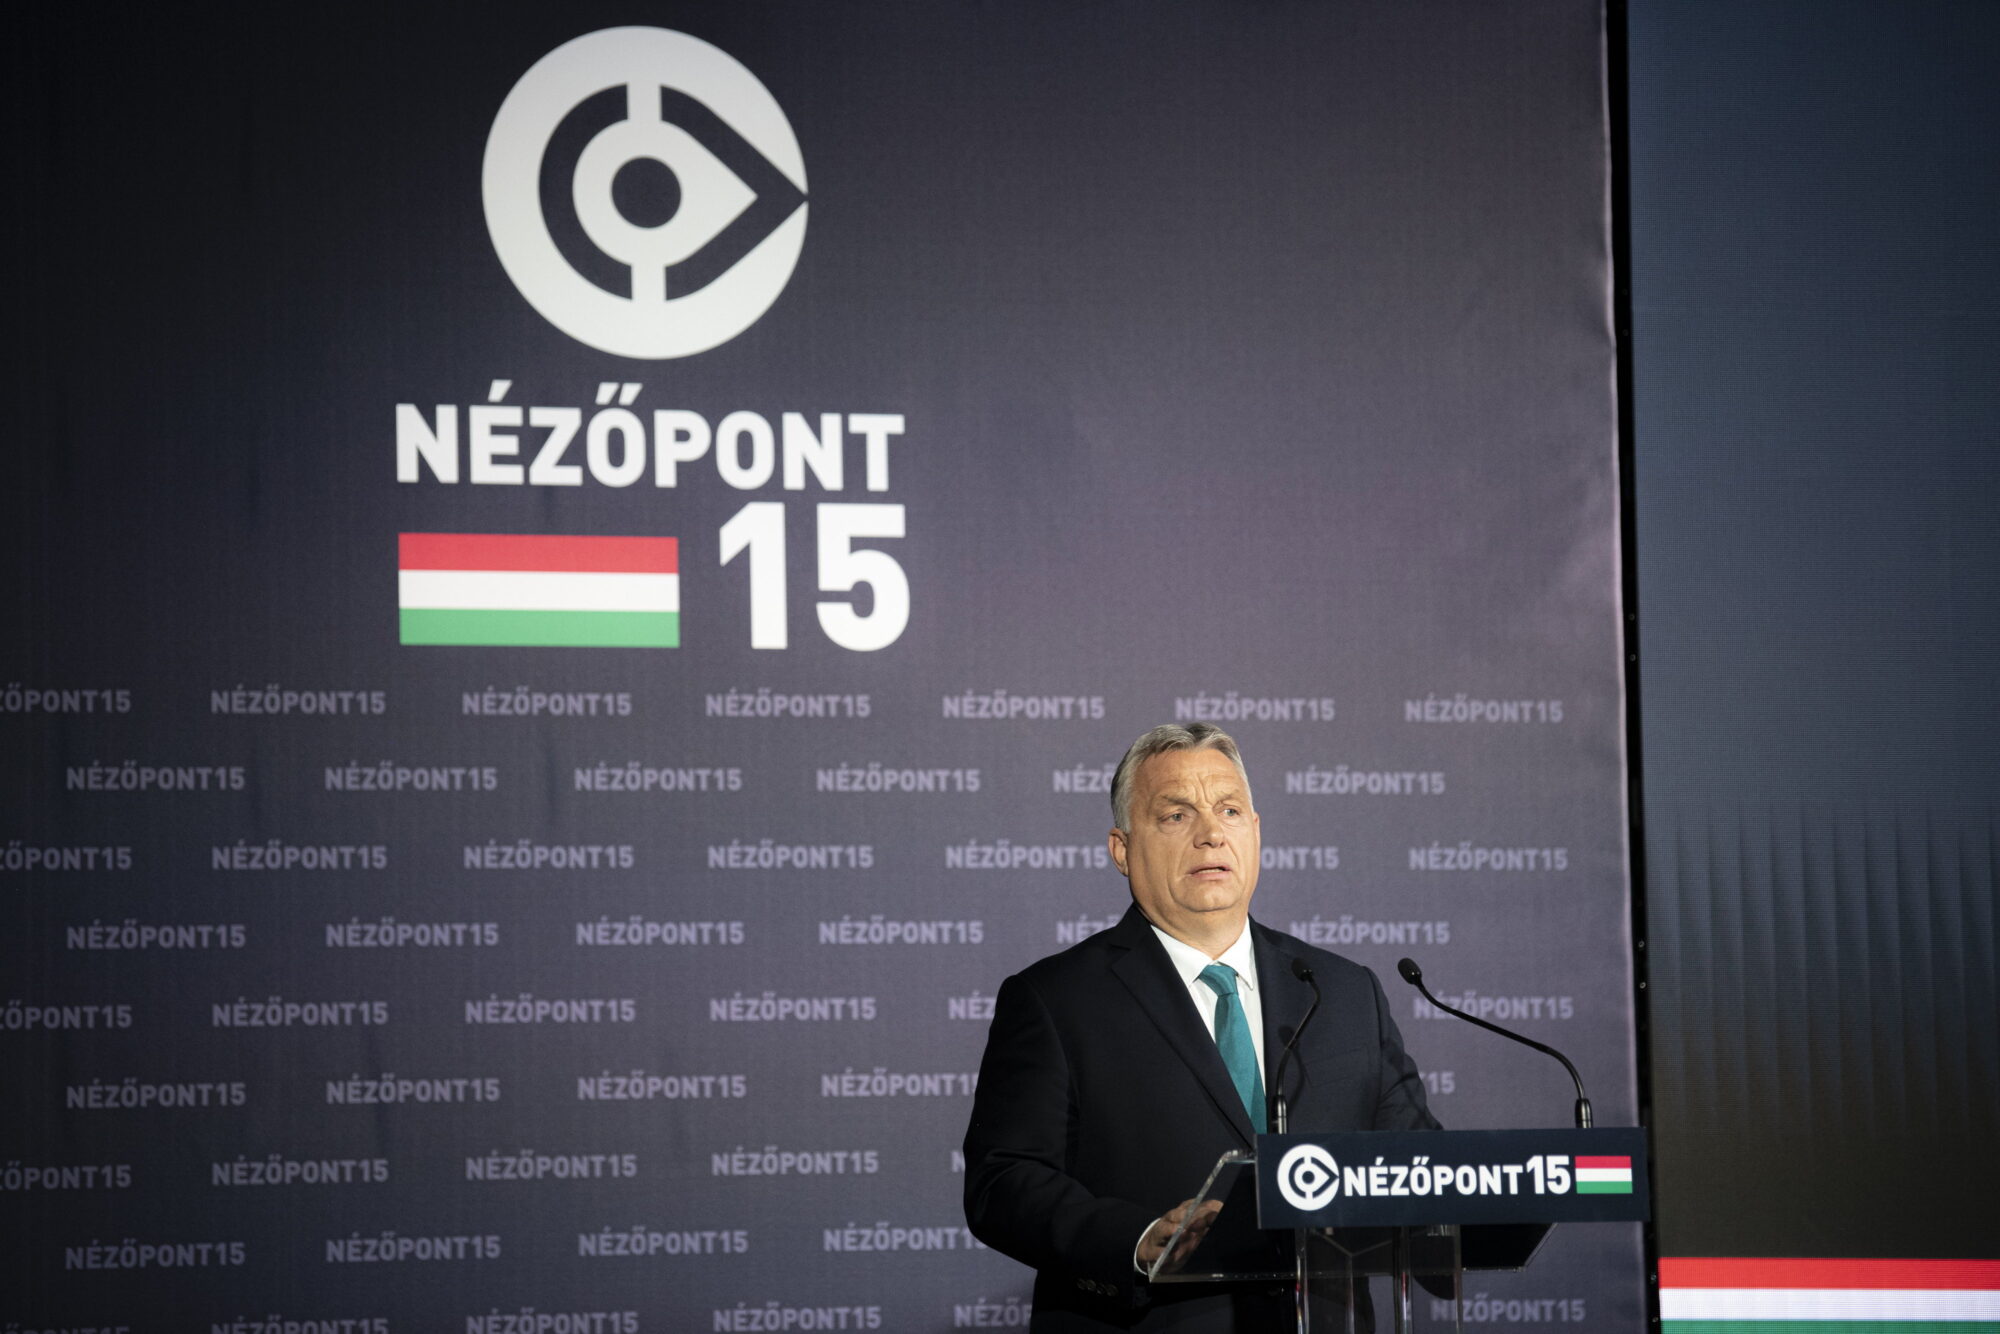 15TH ANNIVERSARY OF THE NÉZŐPONT INSTITUE